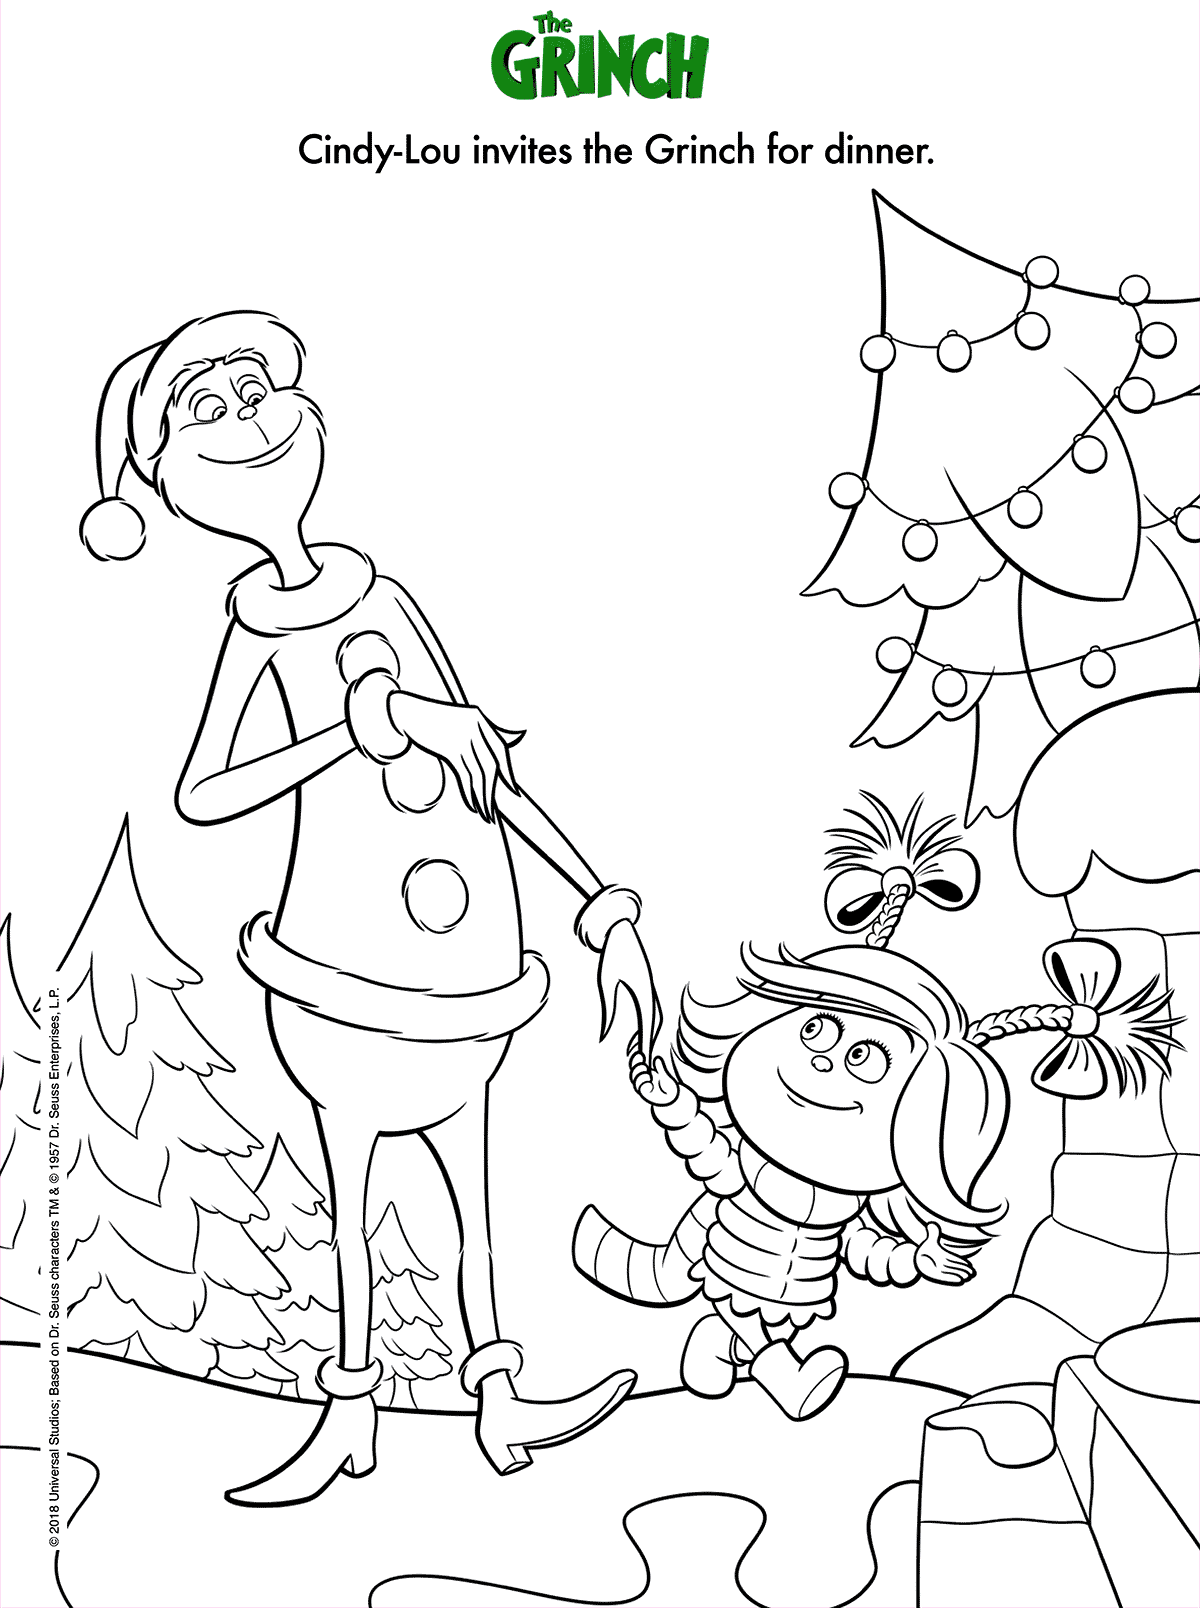 The Grinch Coloring Pages 2018